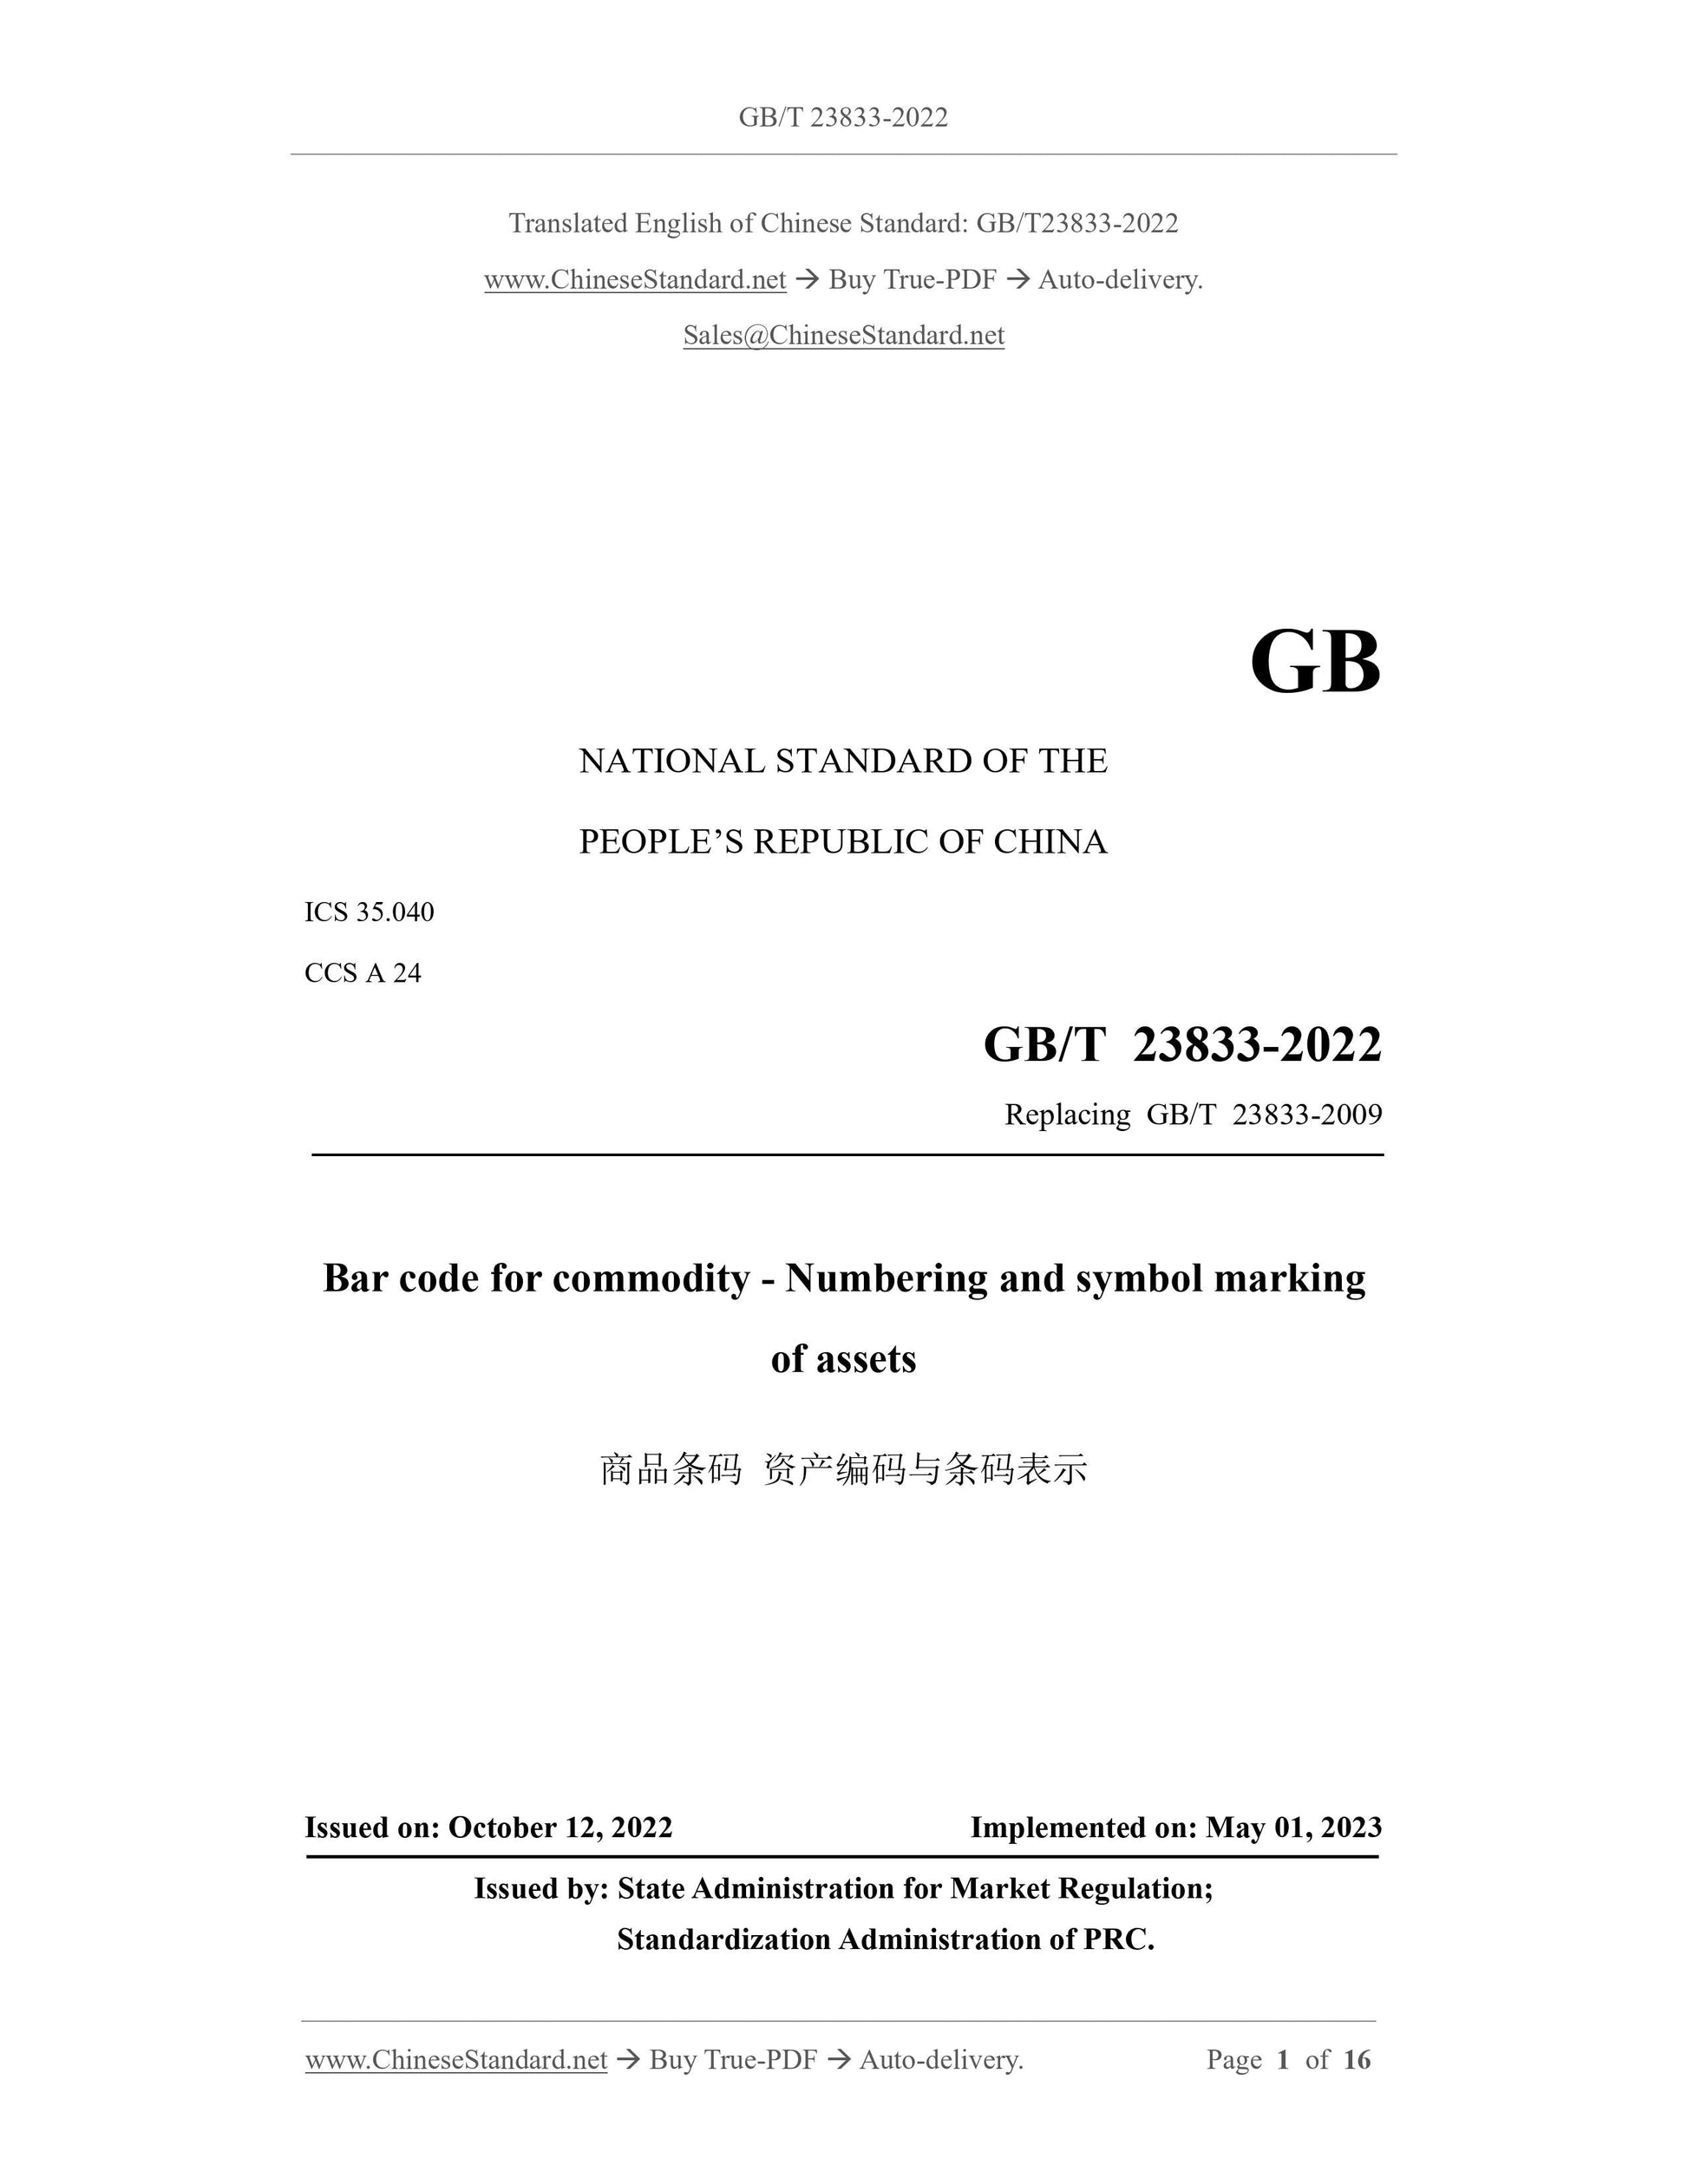 GB/T 23833-2022 Page 1